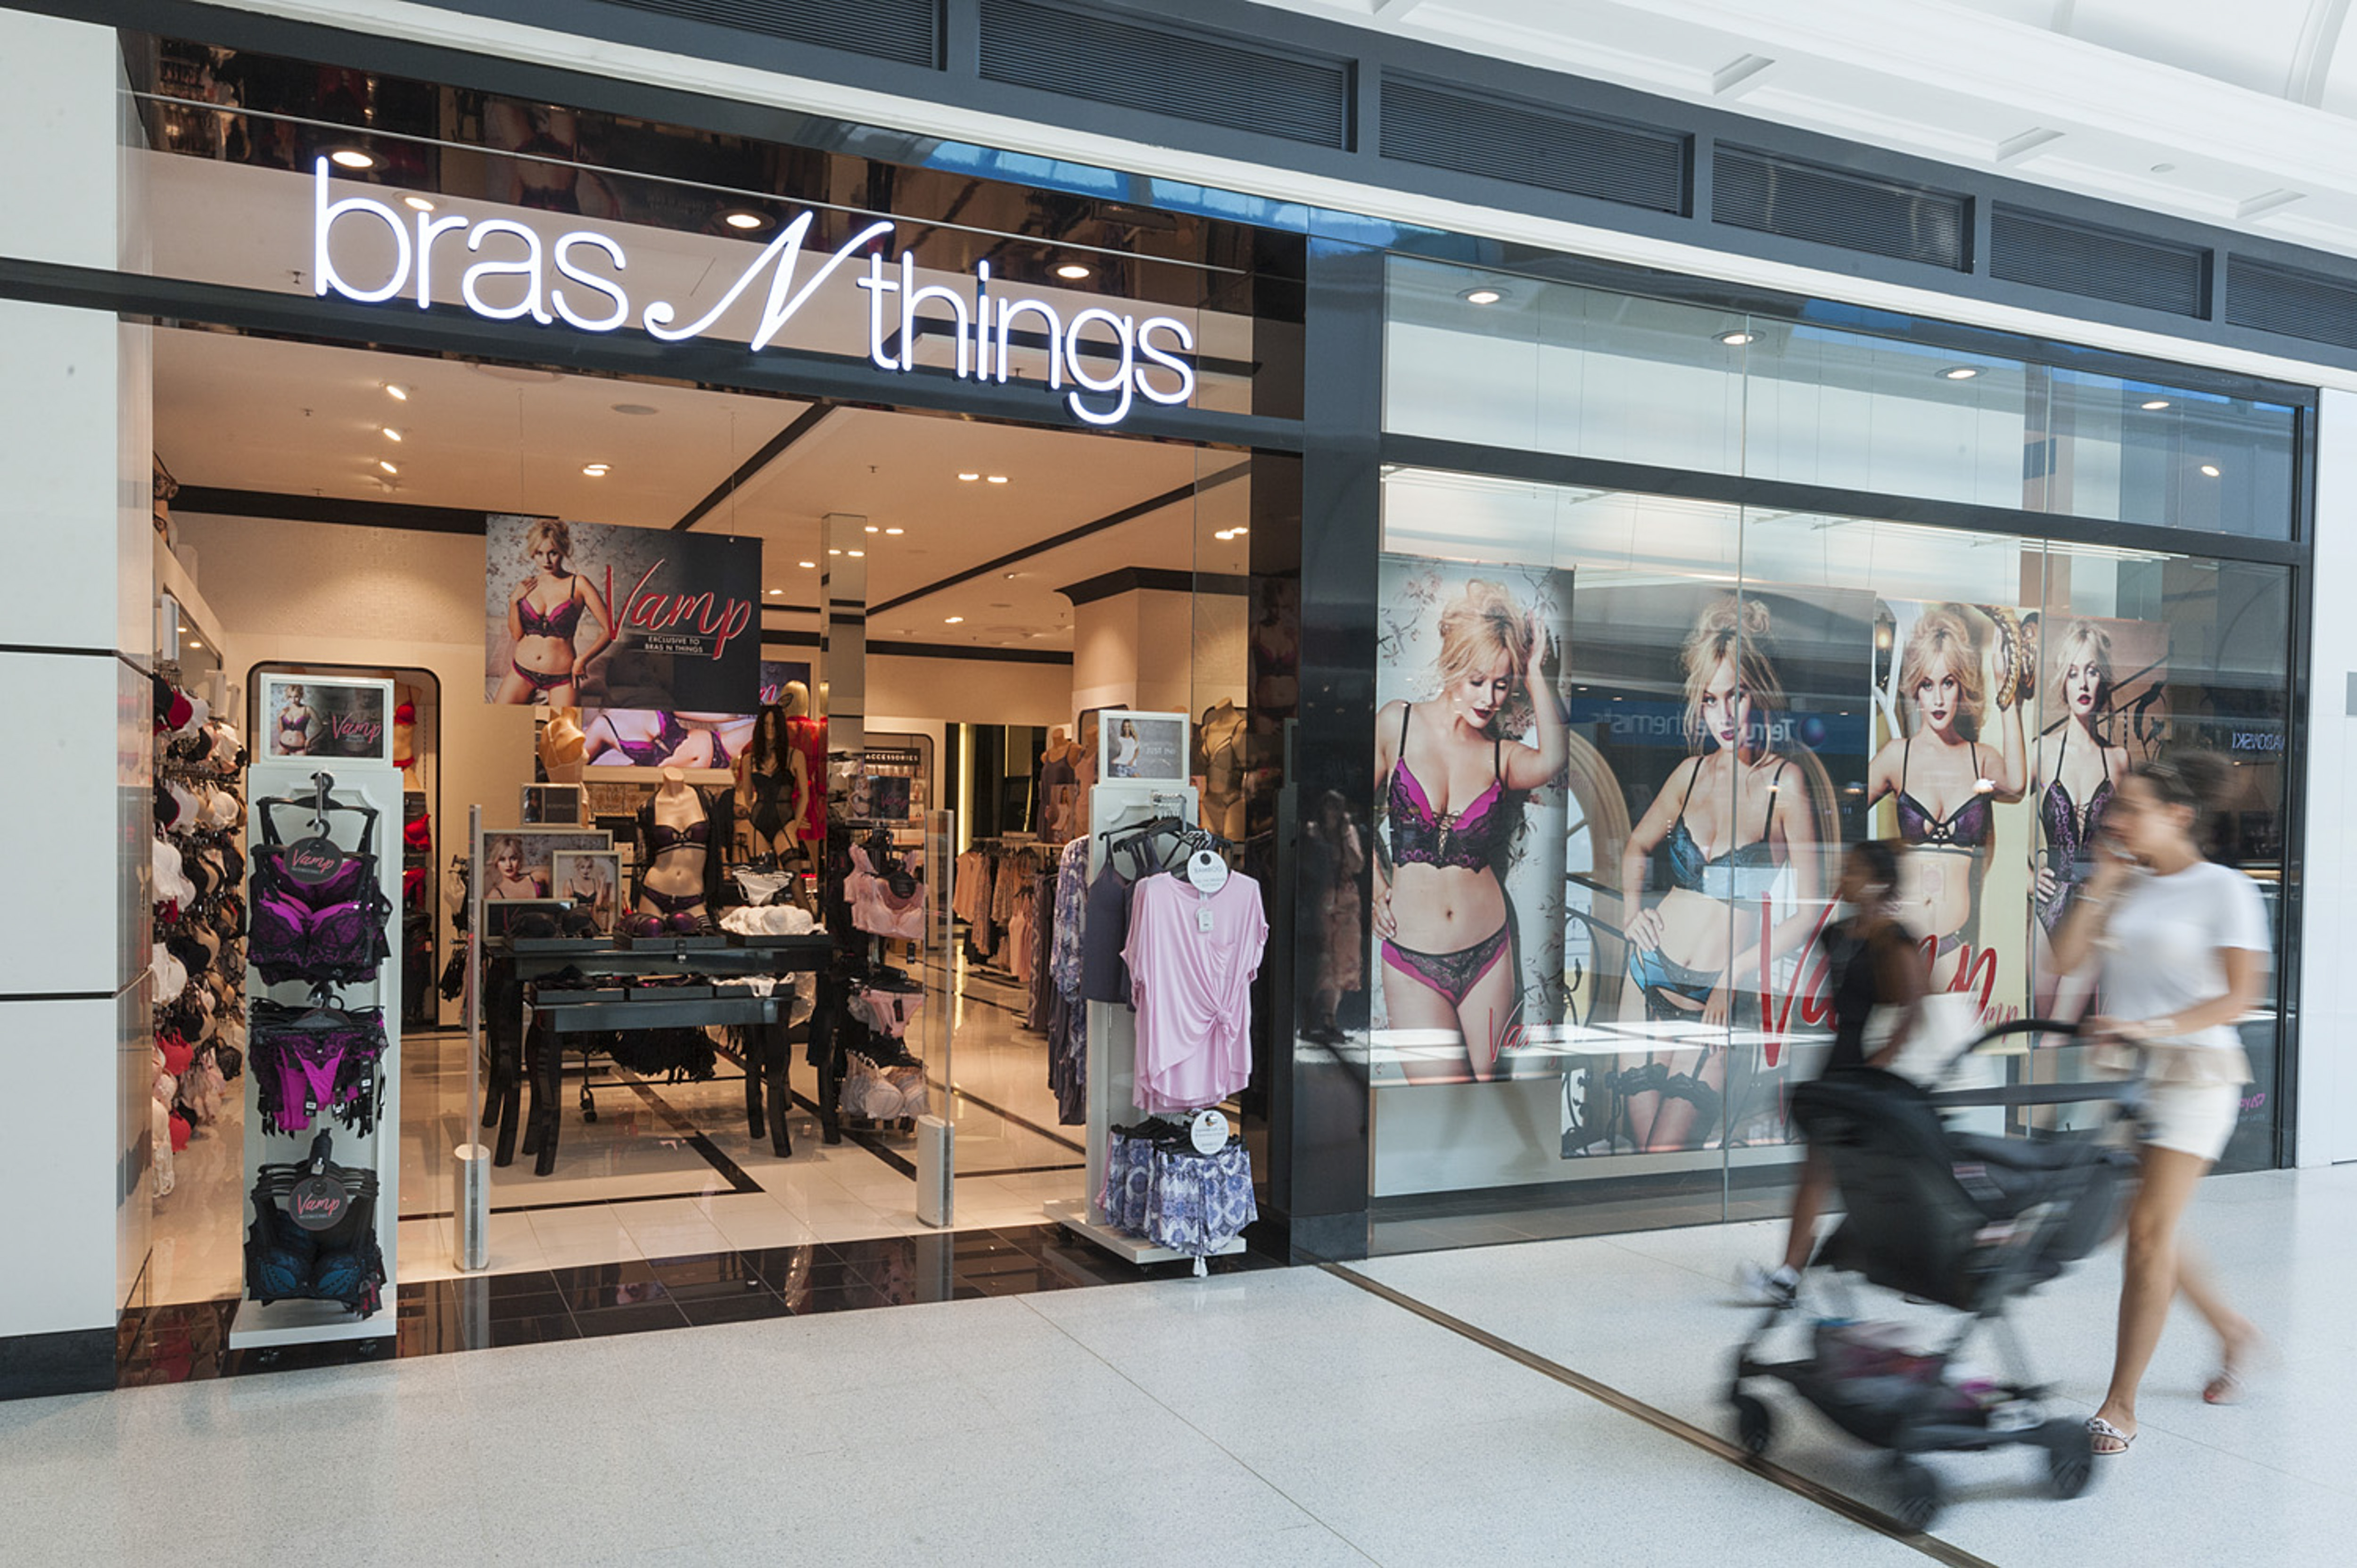 Bras N Things Melbourne Central - Lingerie store in Melbourne